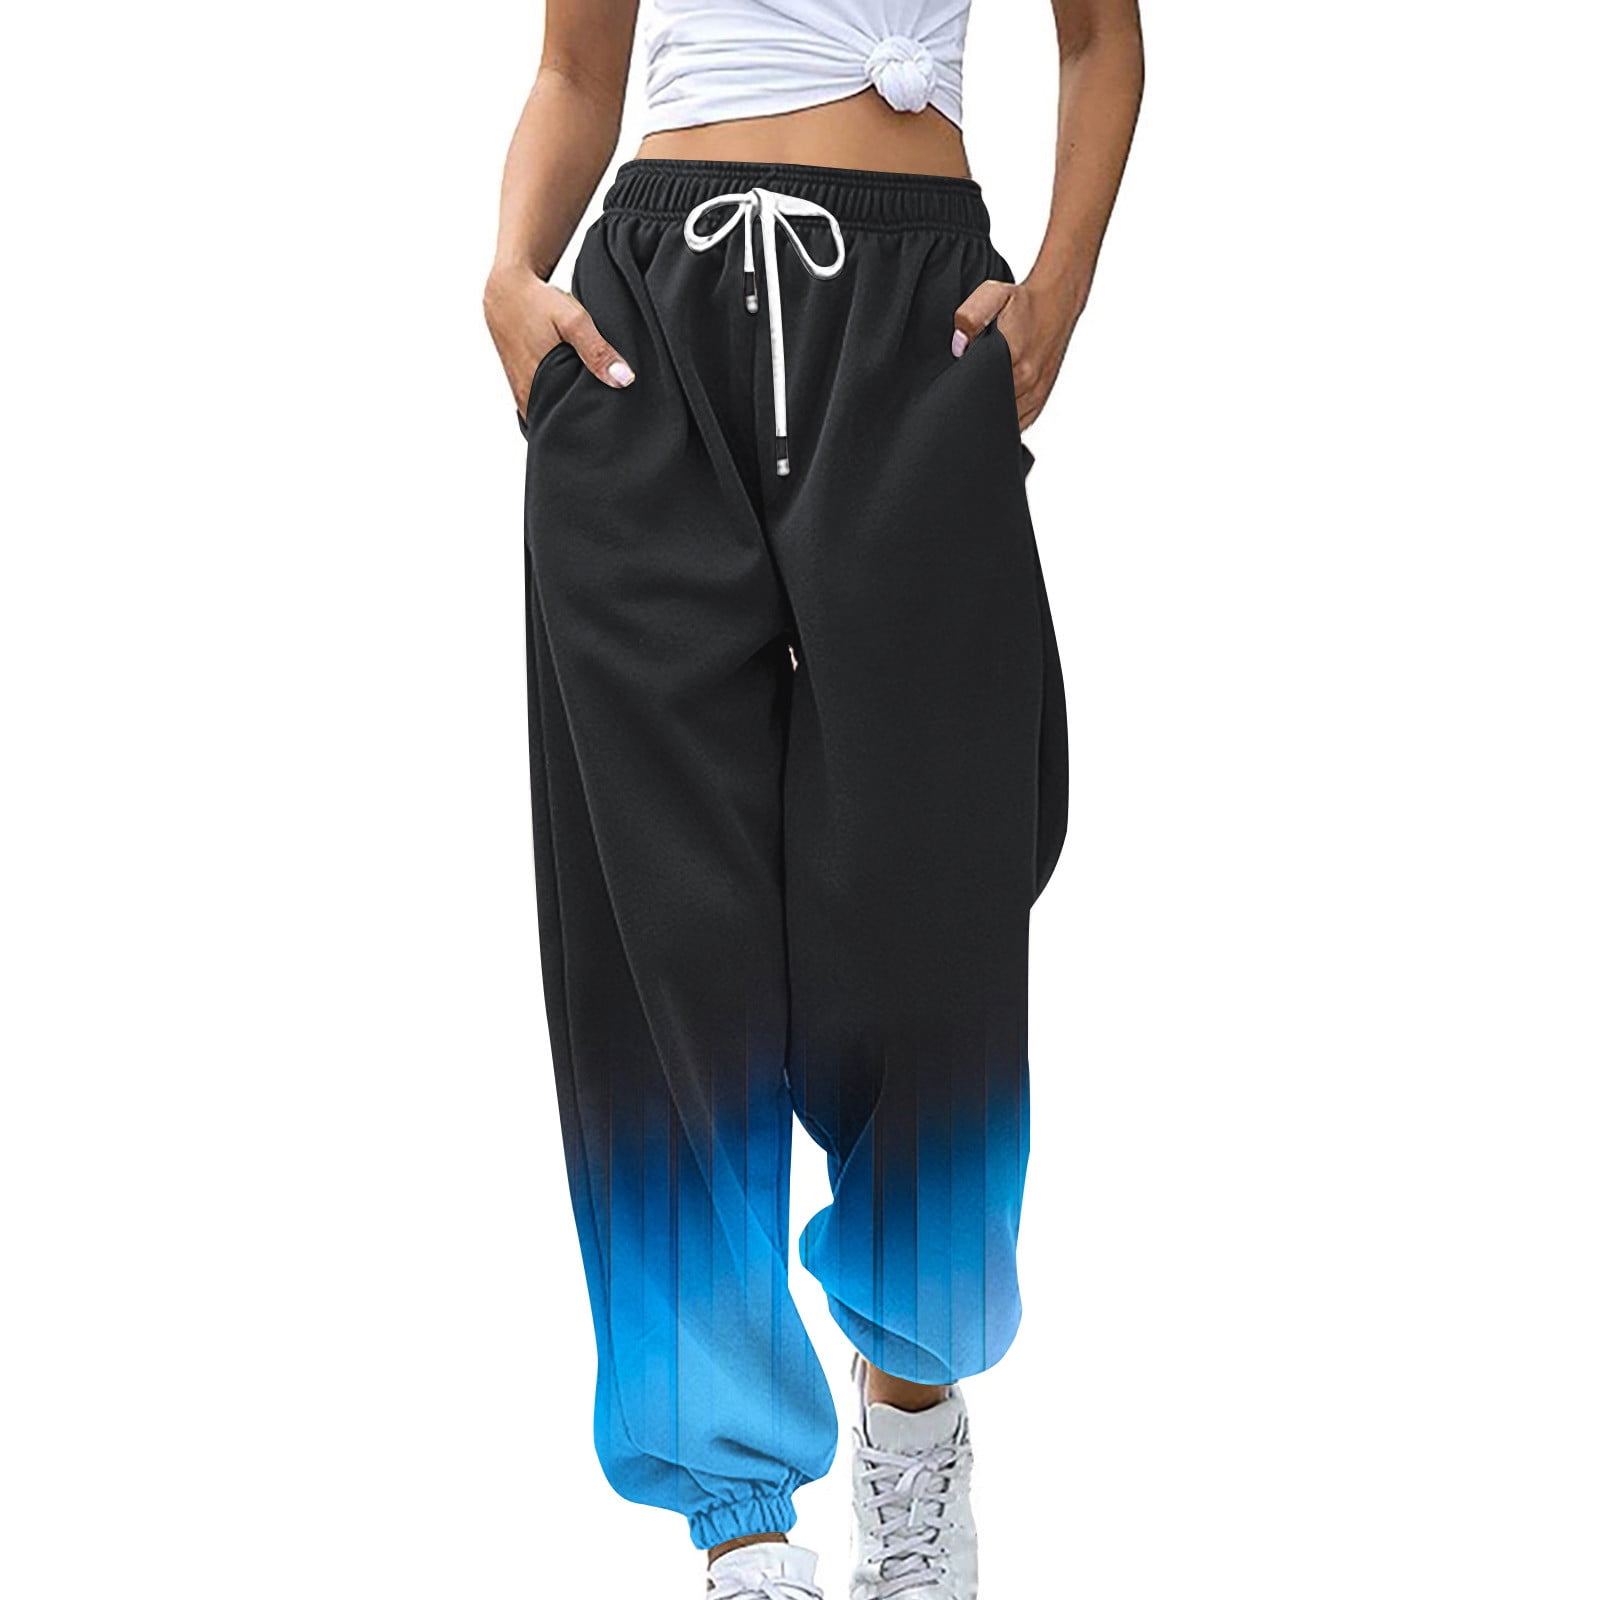 BrilliantMe Women's Casual Jogger Thick Sweatpants Cotton High Waist  Workout Pants Cinch Bottom Trousers with Pockets